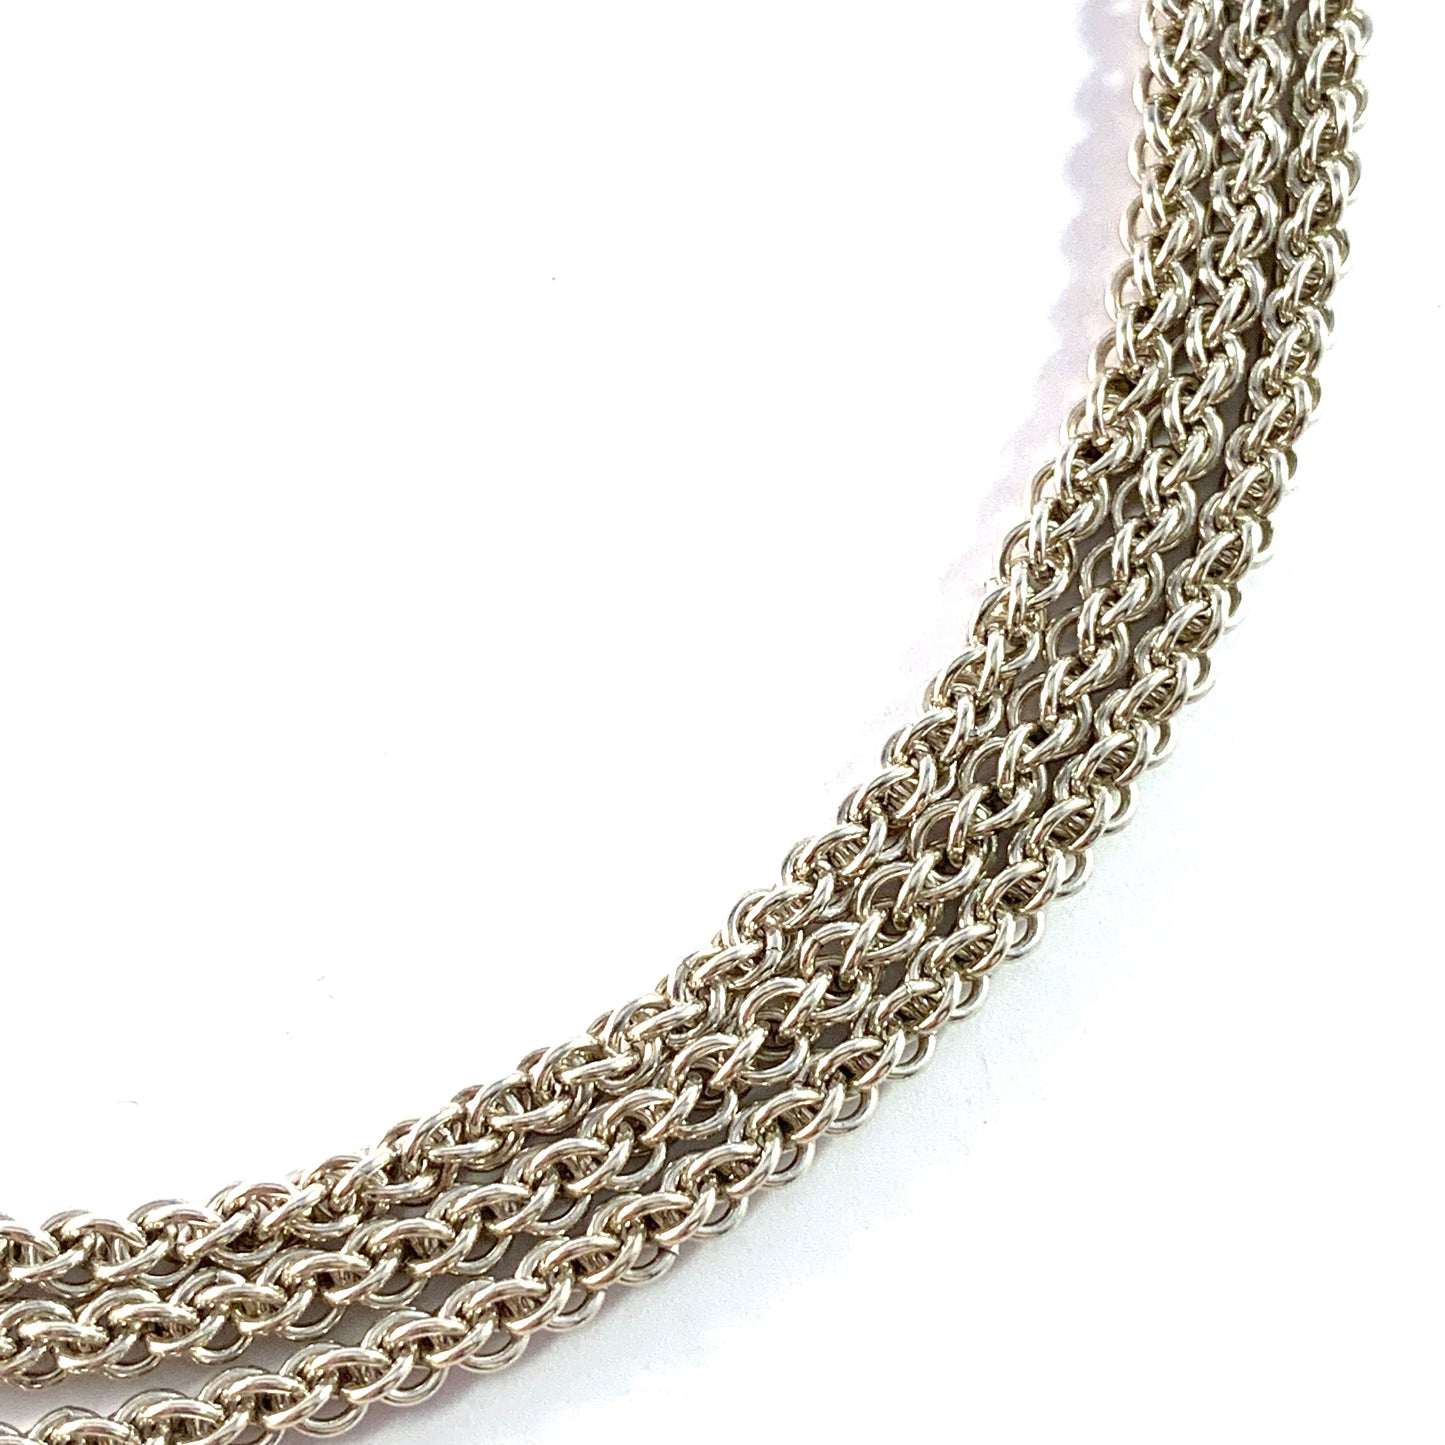 Vintage Sterling Silver 3-strand Chain Necklace. 2 oz.